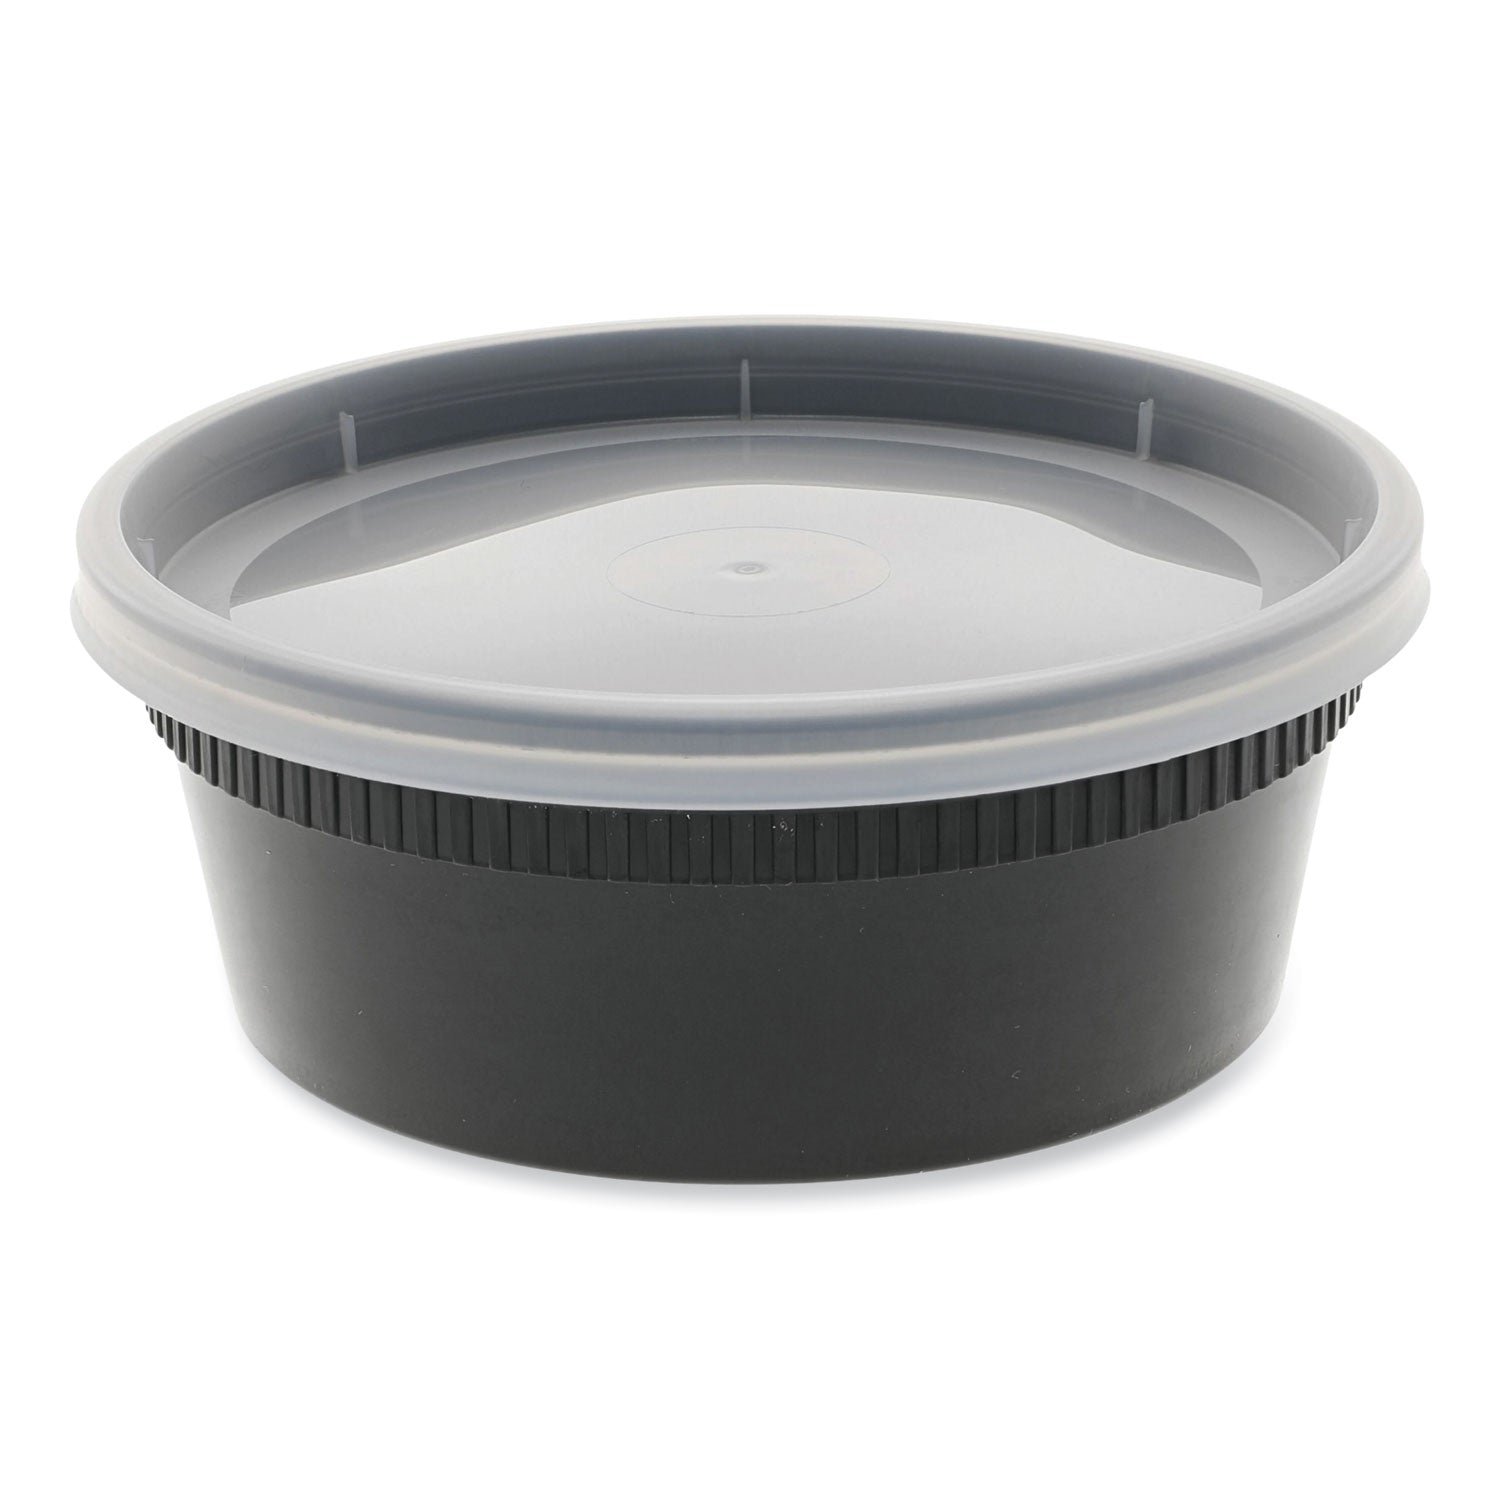 newspring-delitainer-microwavable-container-8-oz-455-x-455-x-18-black-clear-plastic-240-carton_pctyl2508b - 1